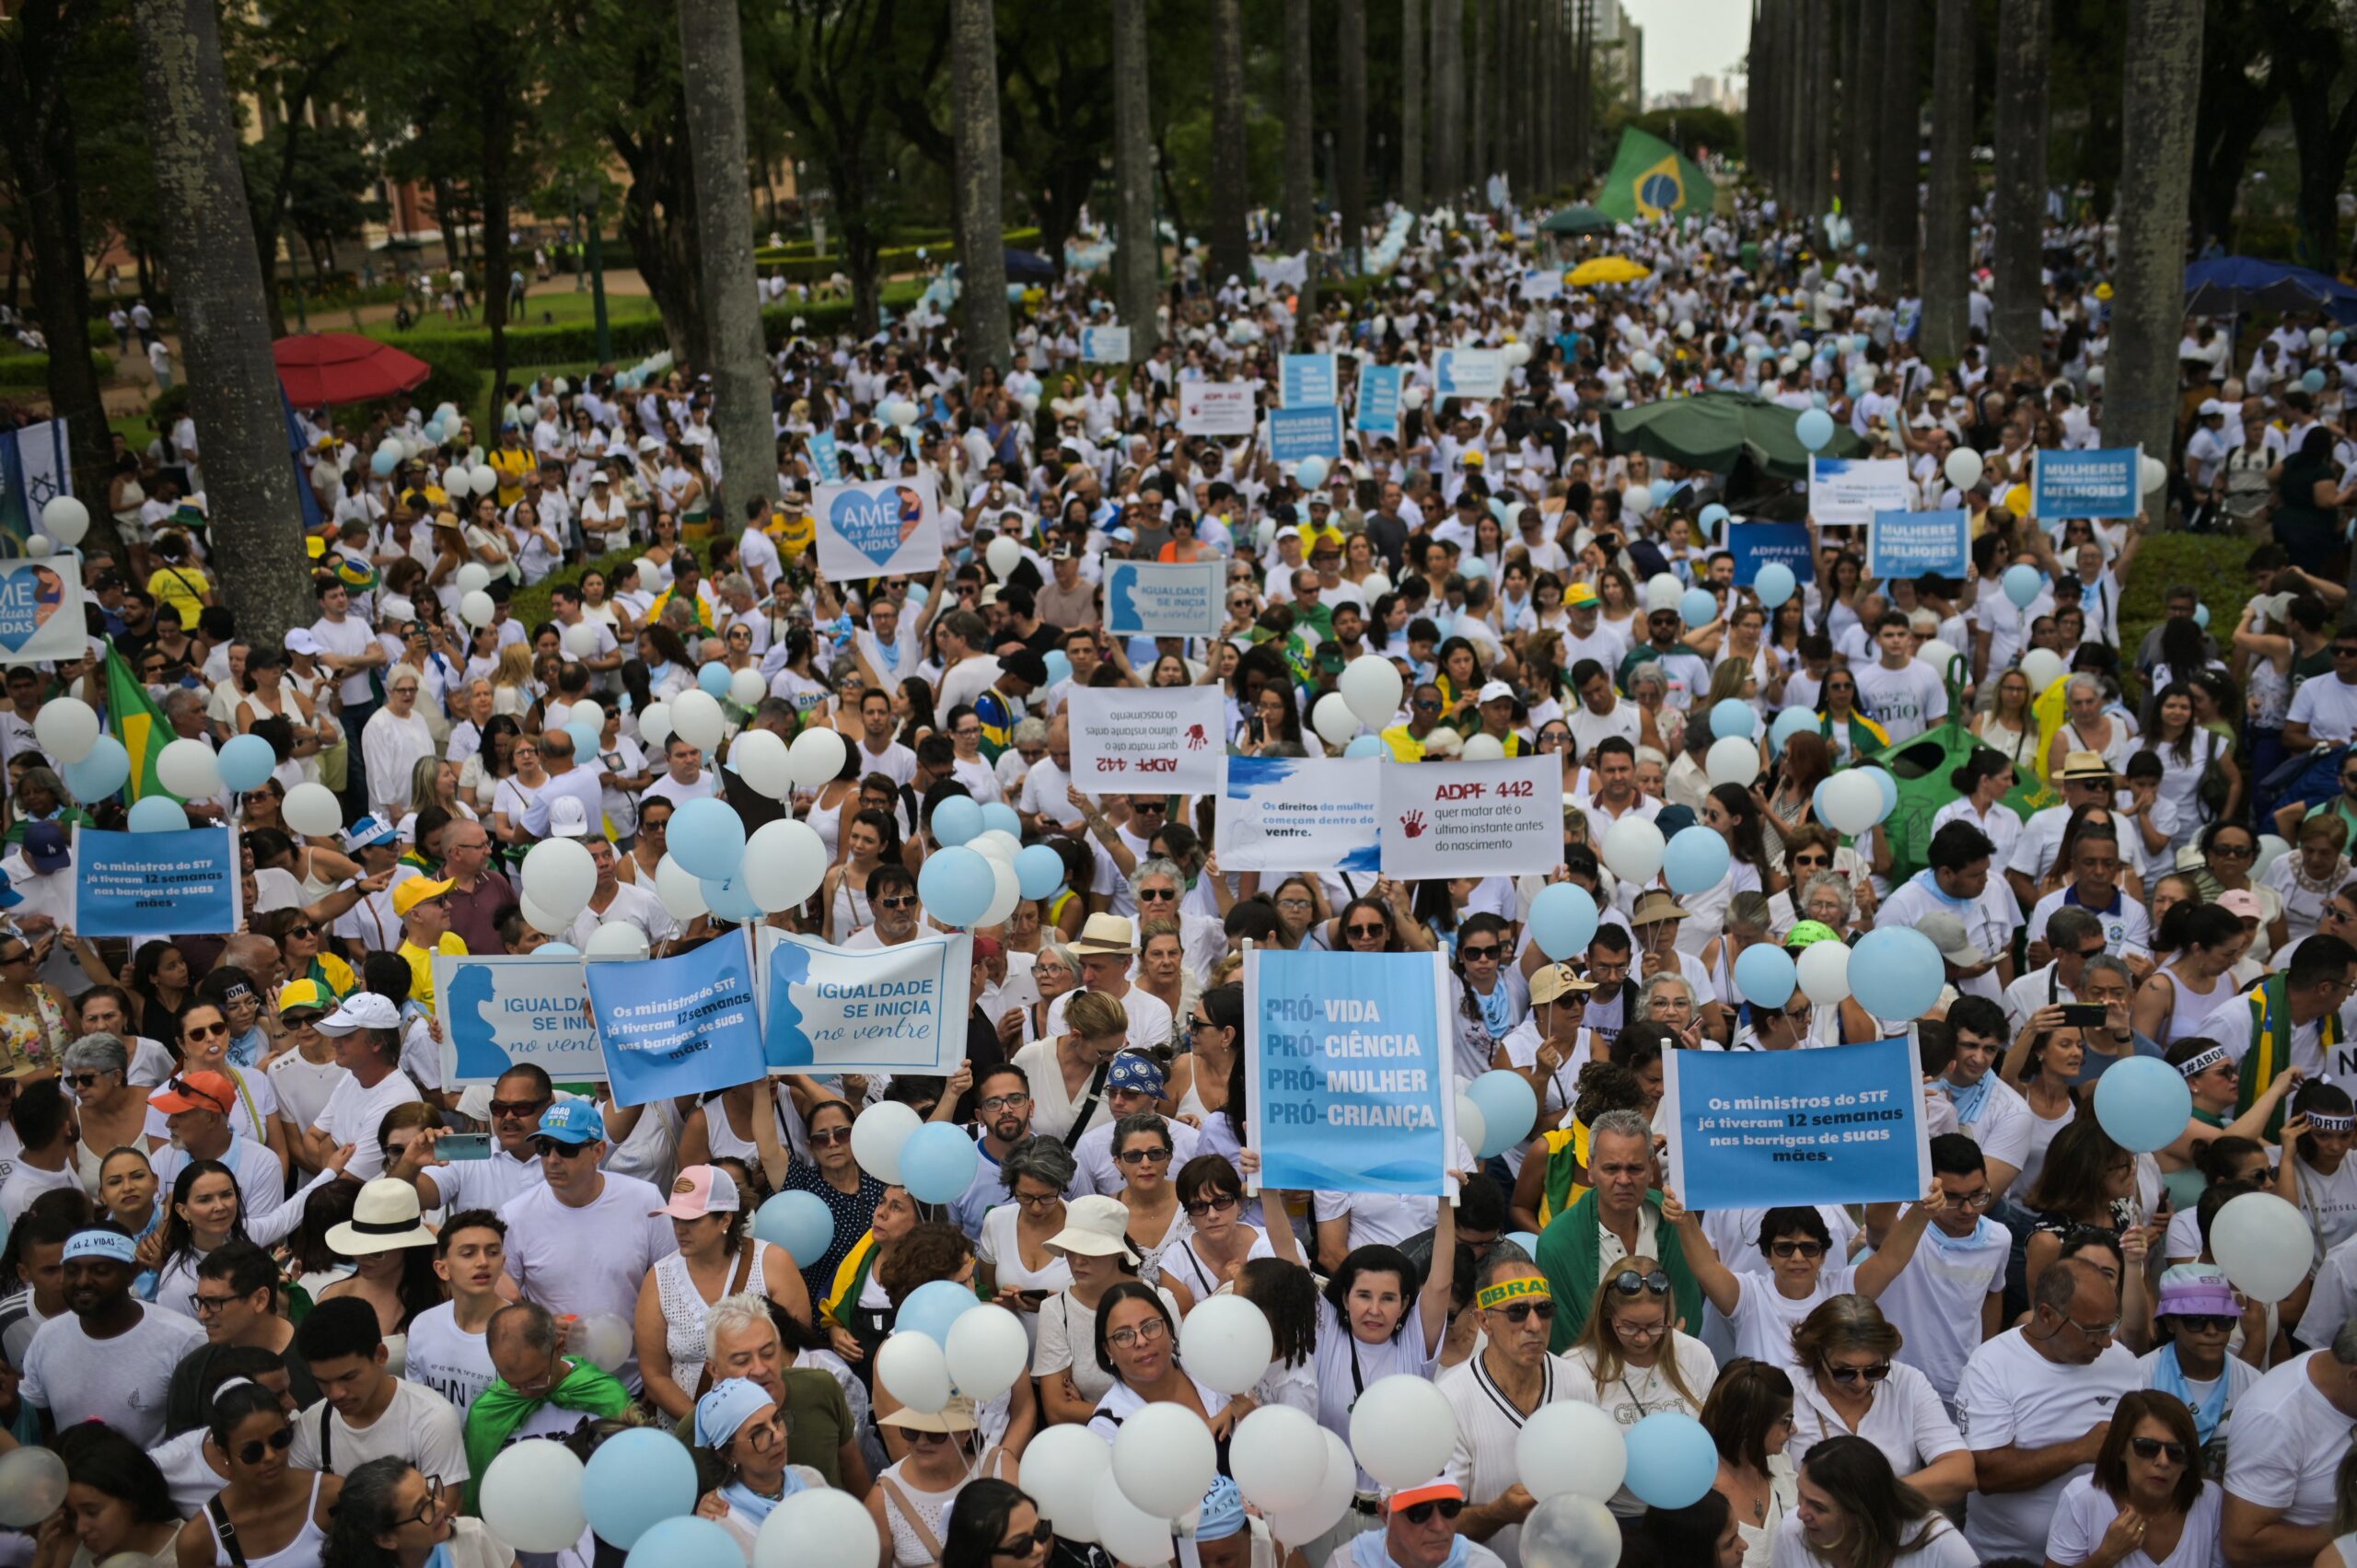 Pro-life activists gather during a protest in Belo Horizonte, Brazil, Oct. 8, 2023. Pro-life activists demonstrated in dozens of Brazilian cities that day to celebrate the country's Day of the Unborn Child and protest against the decriminalization of abortion, a possibility that was being analyzed by the Supreme Court in September. (OSV News photo/Washington Alves, Reuters)